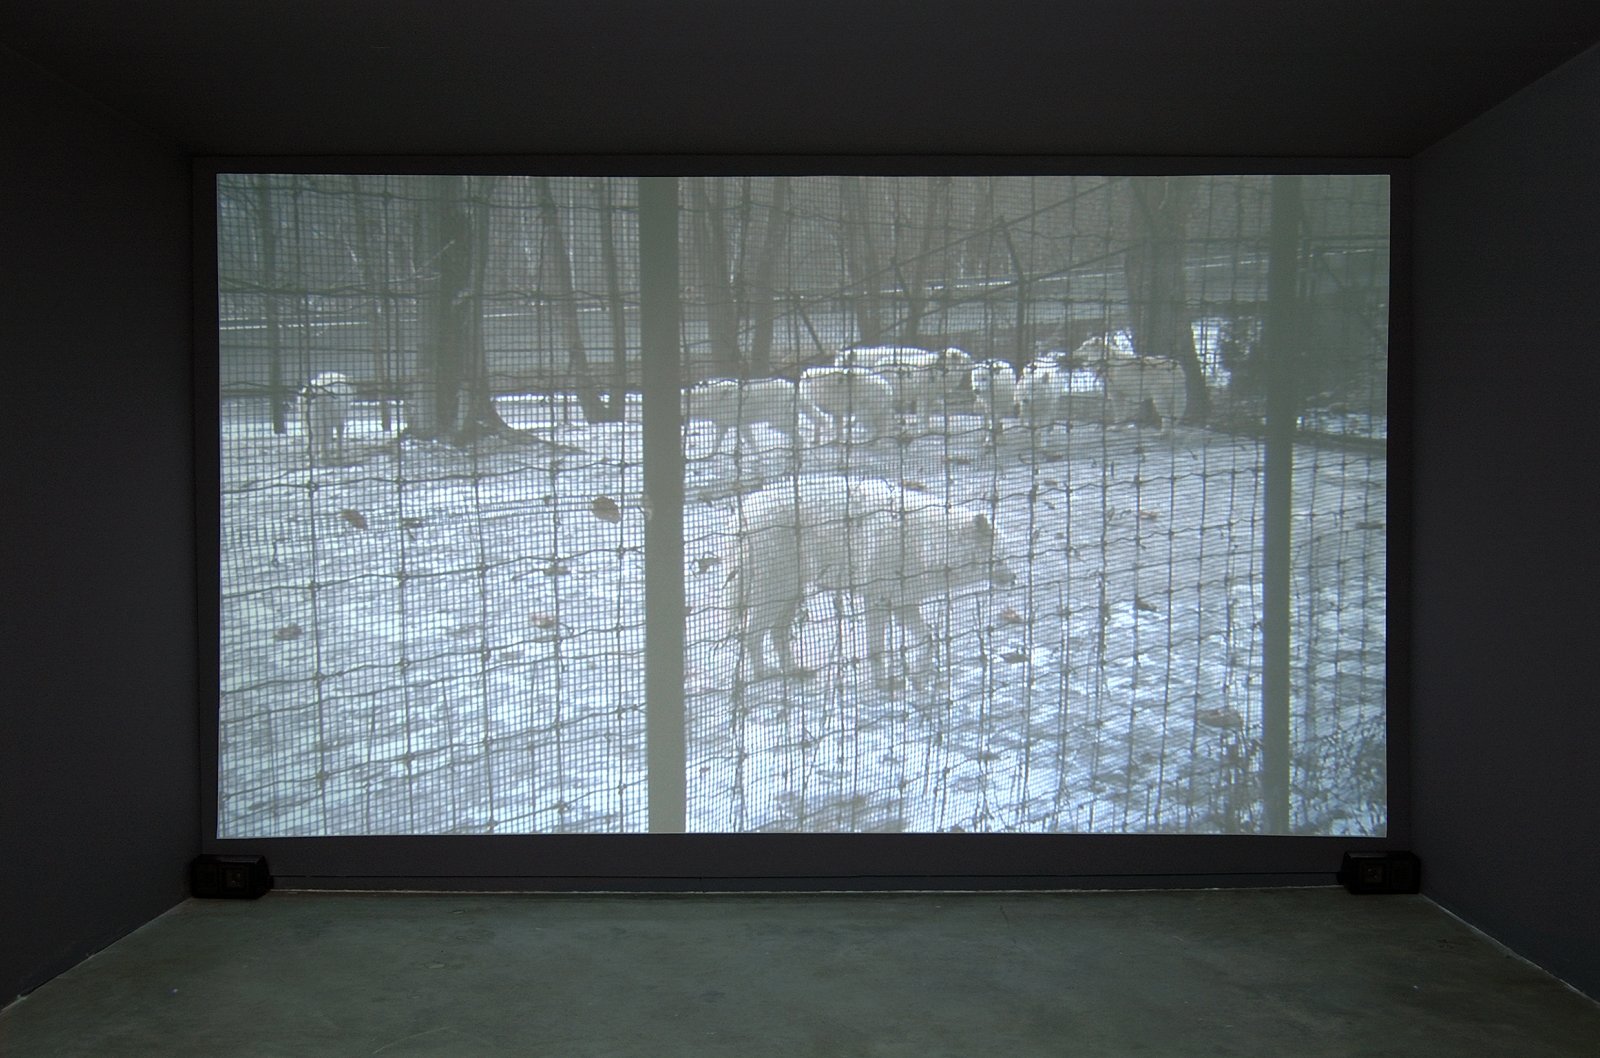 Kevin Schmidt, Sad Wolf (detail), 2006, DIY projection installation, 4 minutes, 11 seconds. Installation view, Catriona Jeffries, Vancouver, 2006 by Kevin Schmidt